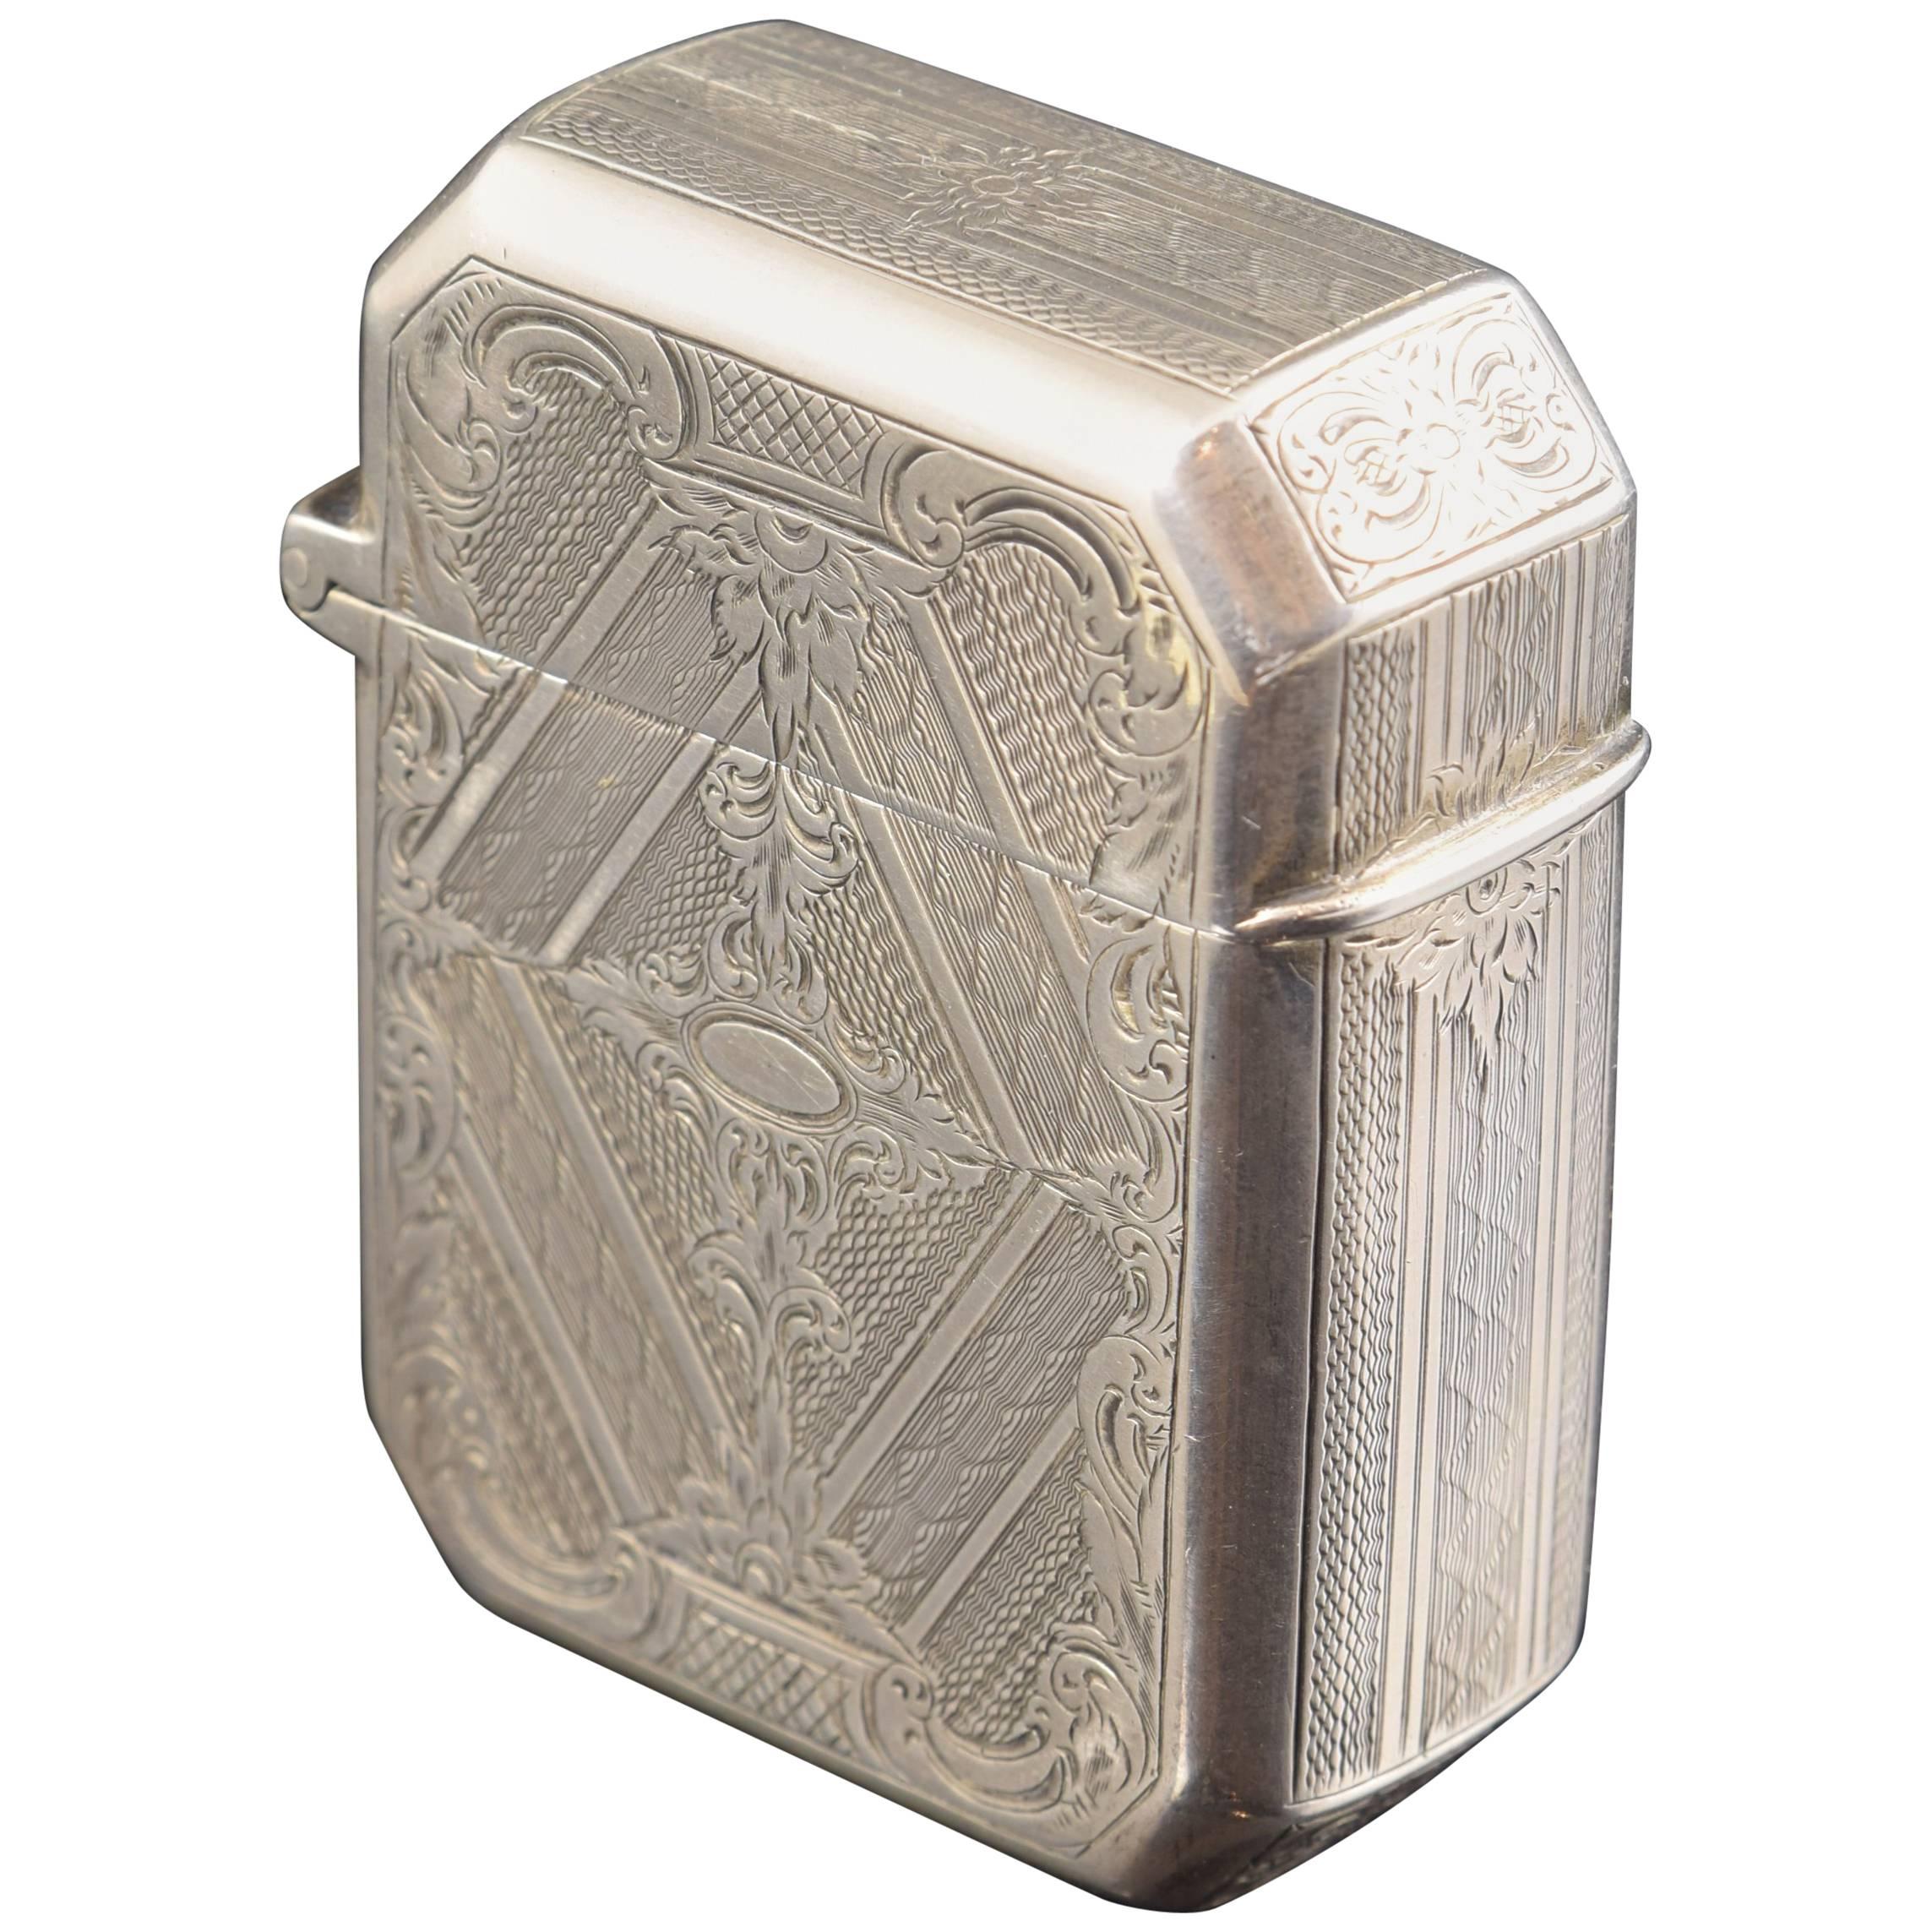 Solid Silver Box, with Hallmarks, 19th-20th Centuries